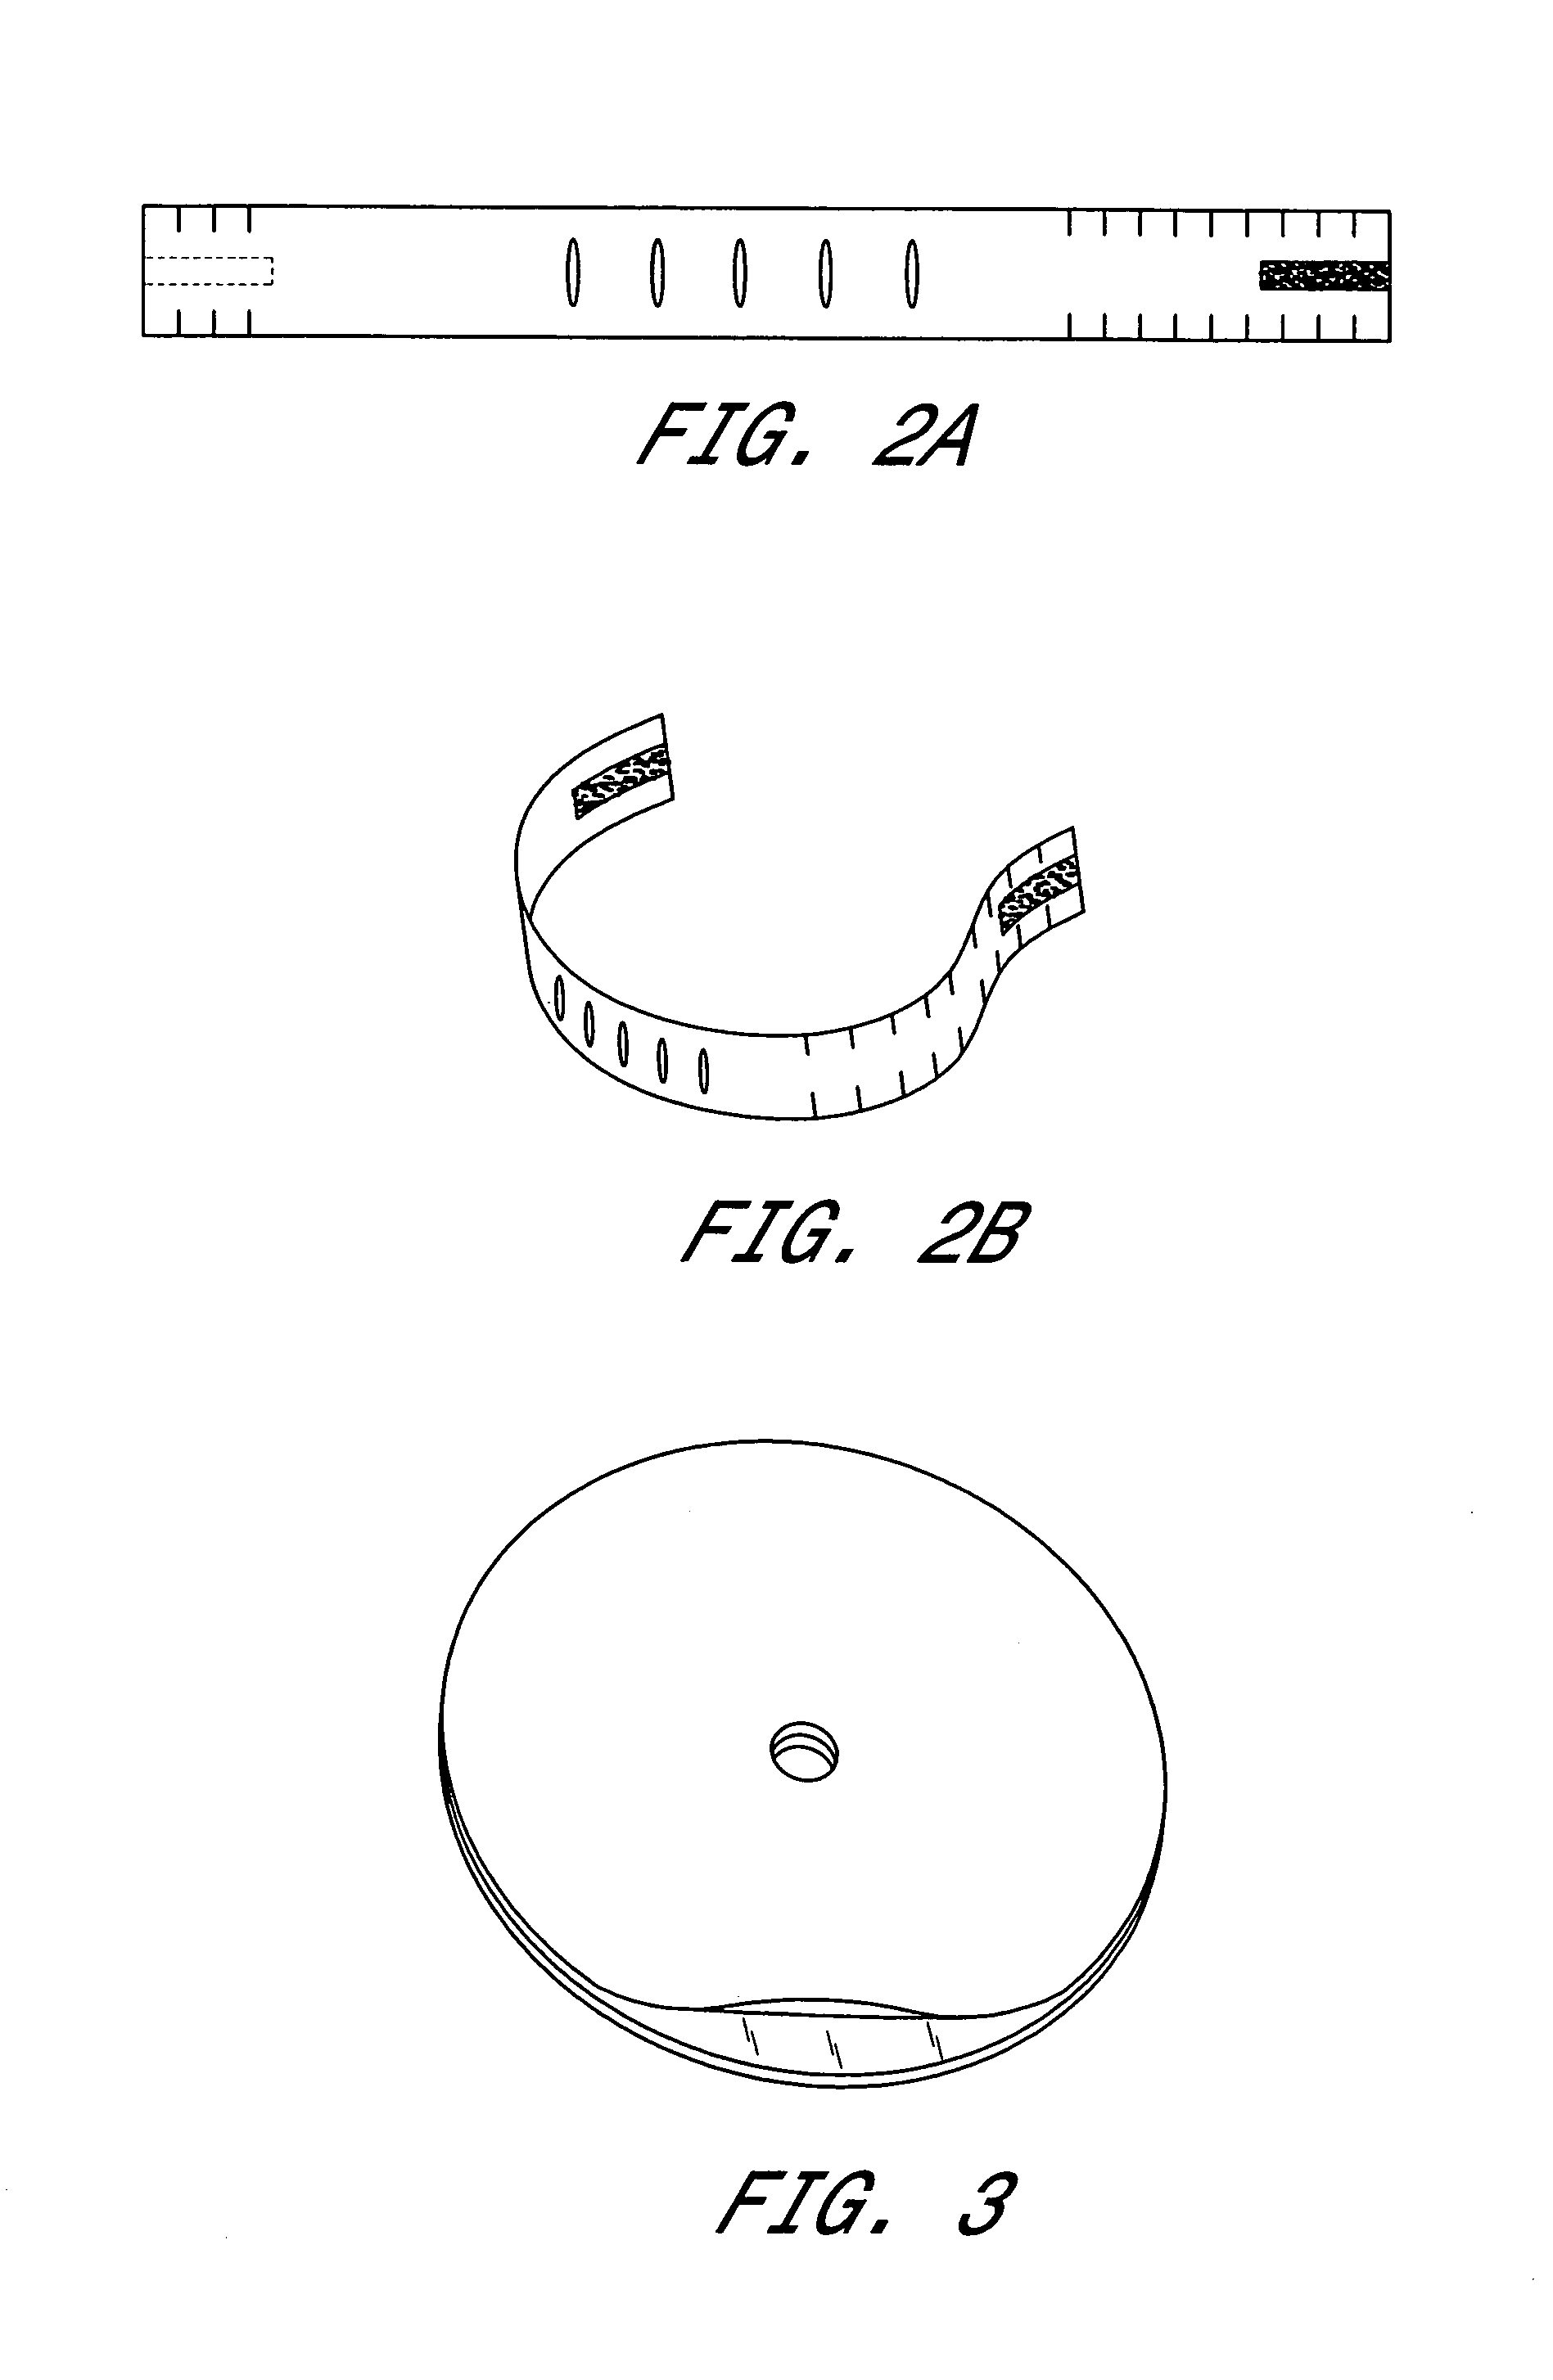 Optical probe including predetermined emission wavelength based on patient type